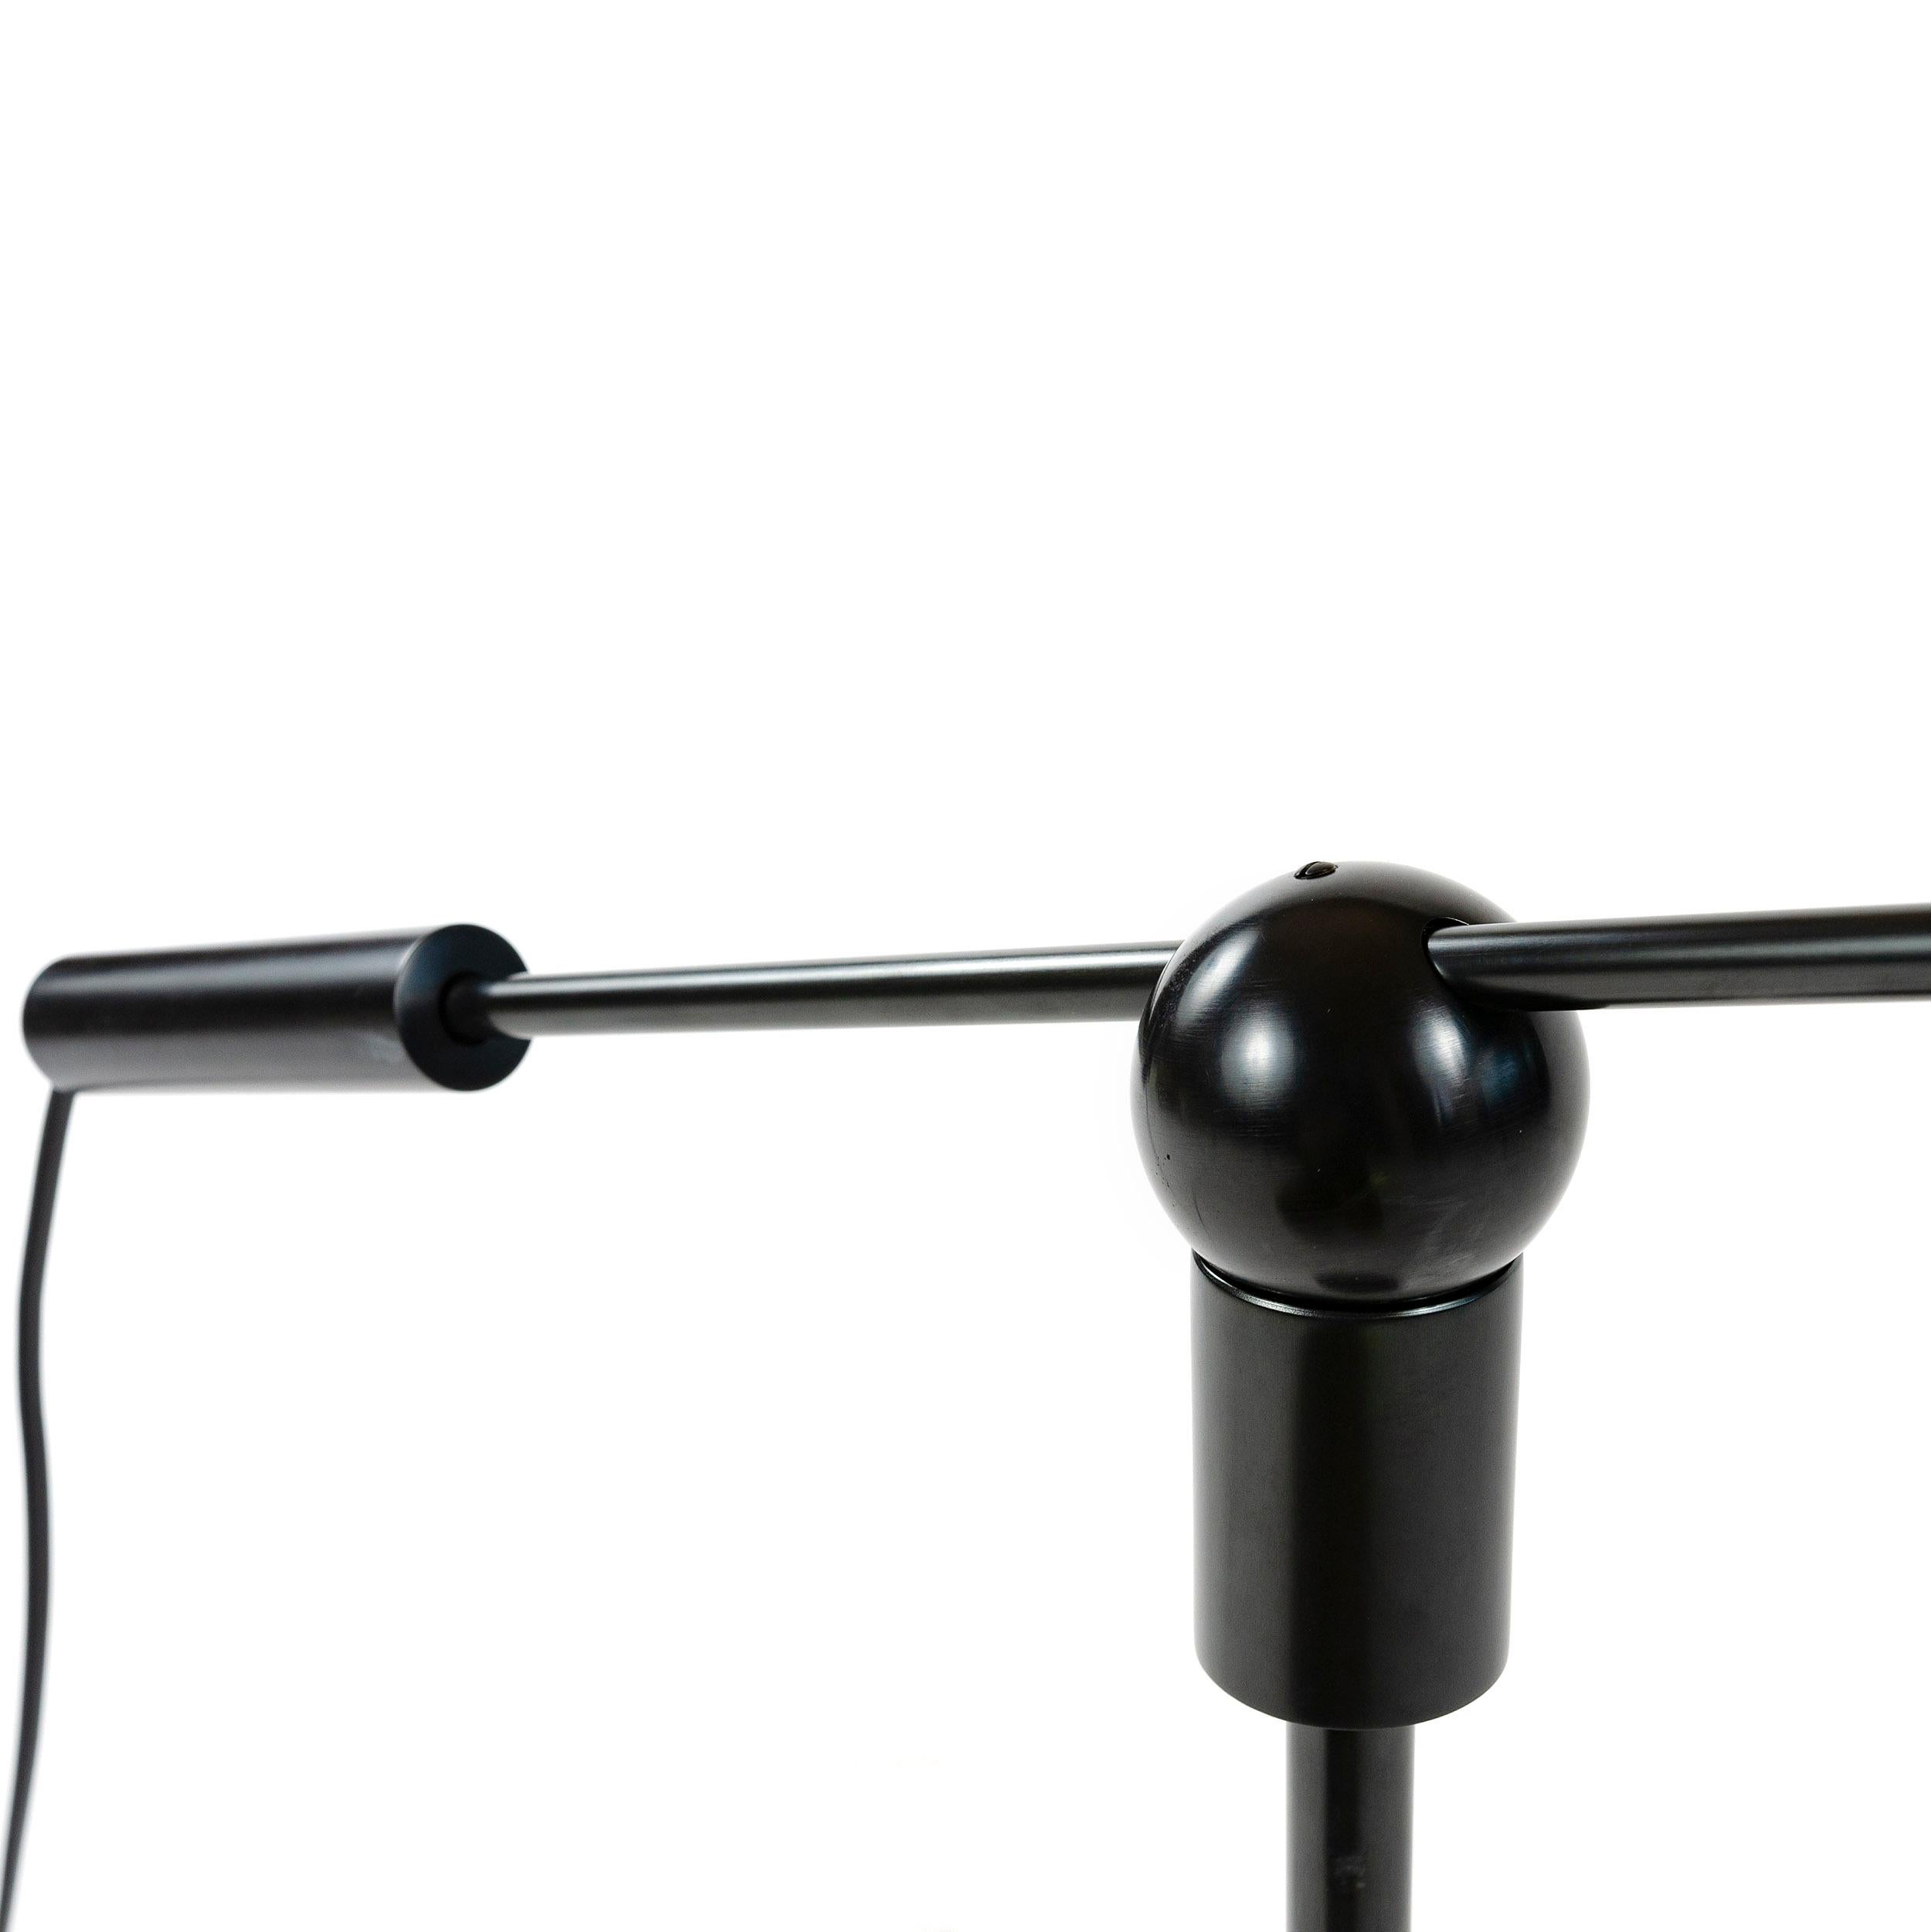 American 1950s Magnetic Ball and Socket Desk Lamp by Gilbert Watrous for Heifetz